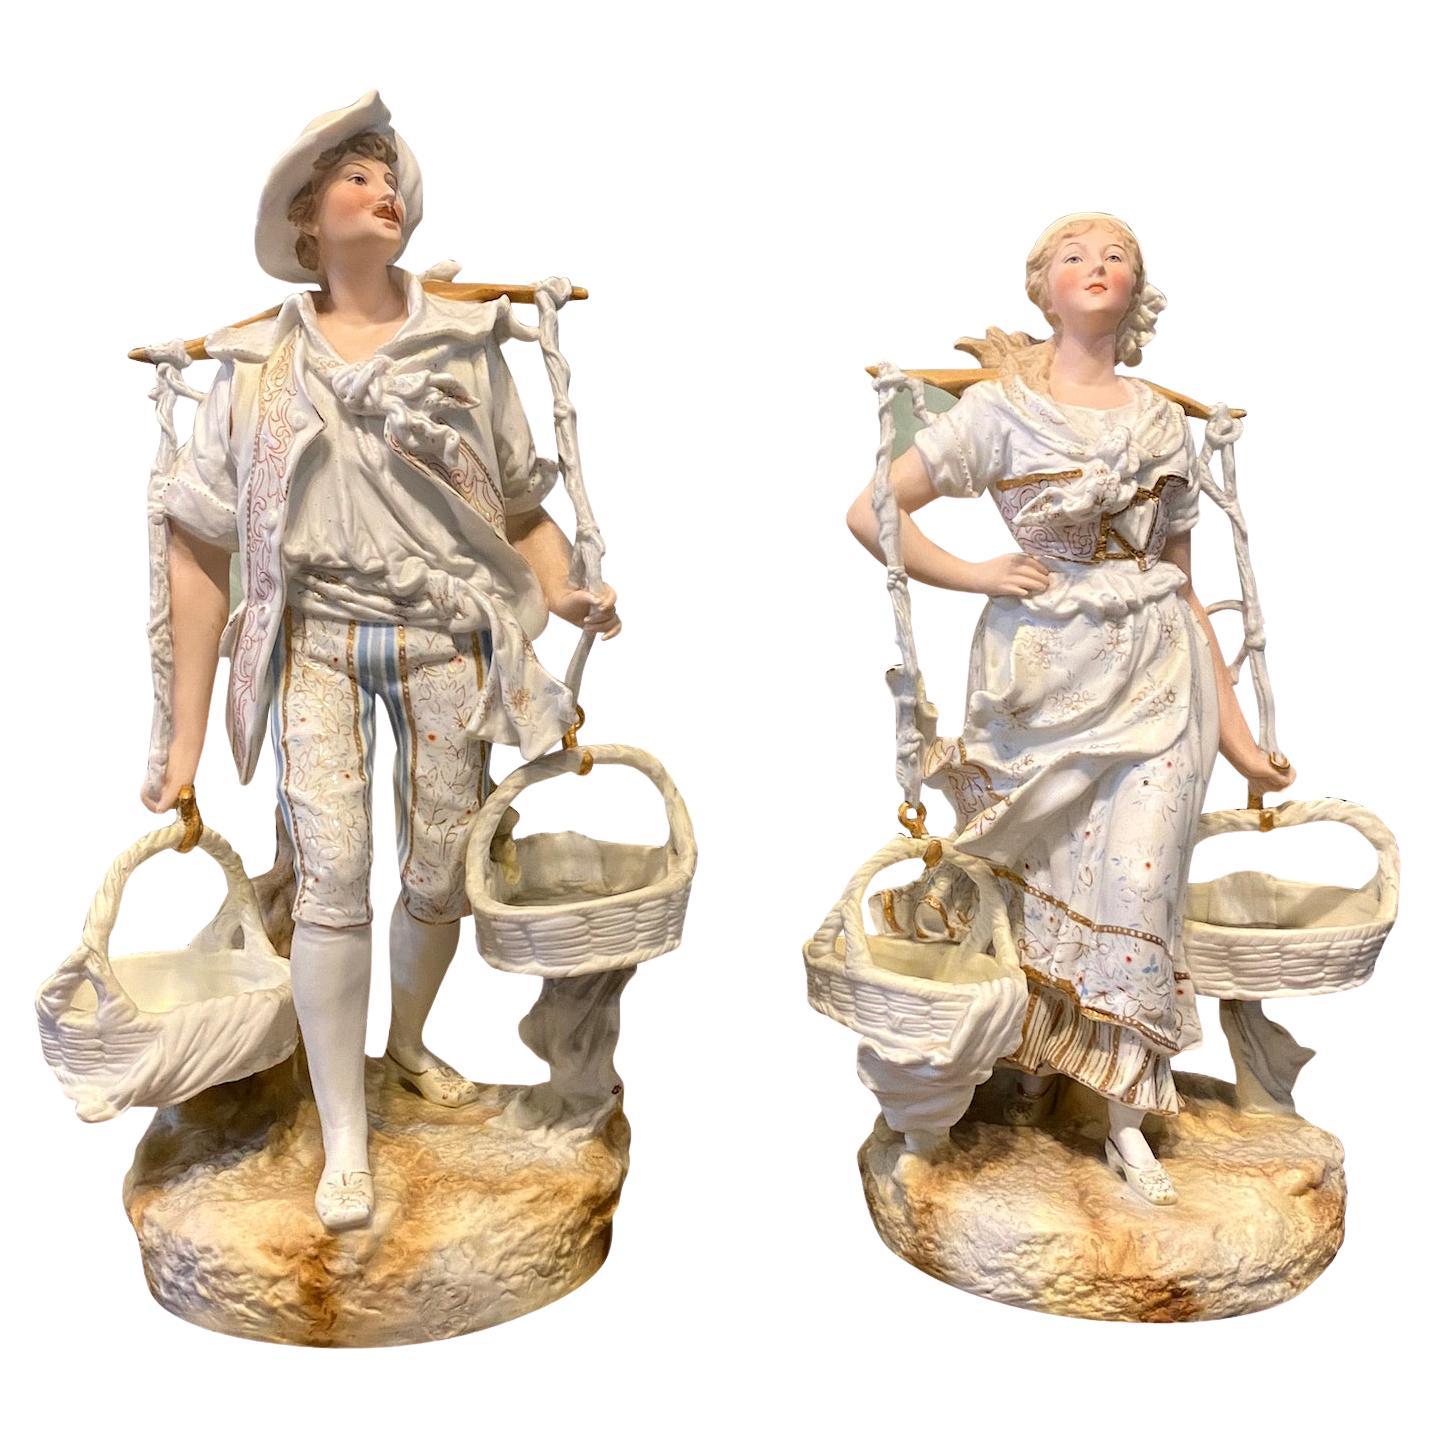 Pair of French Bisque Porcelain Hand Painted Figural Sculptures, Circa 1900